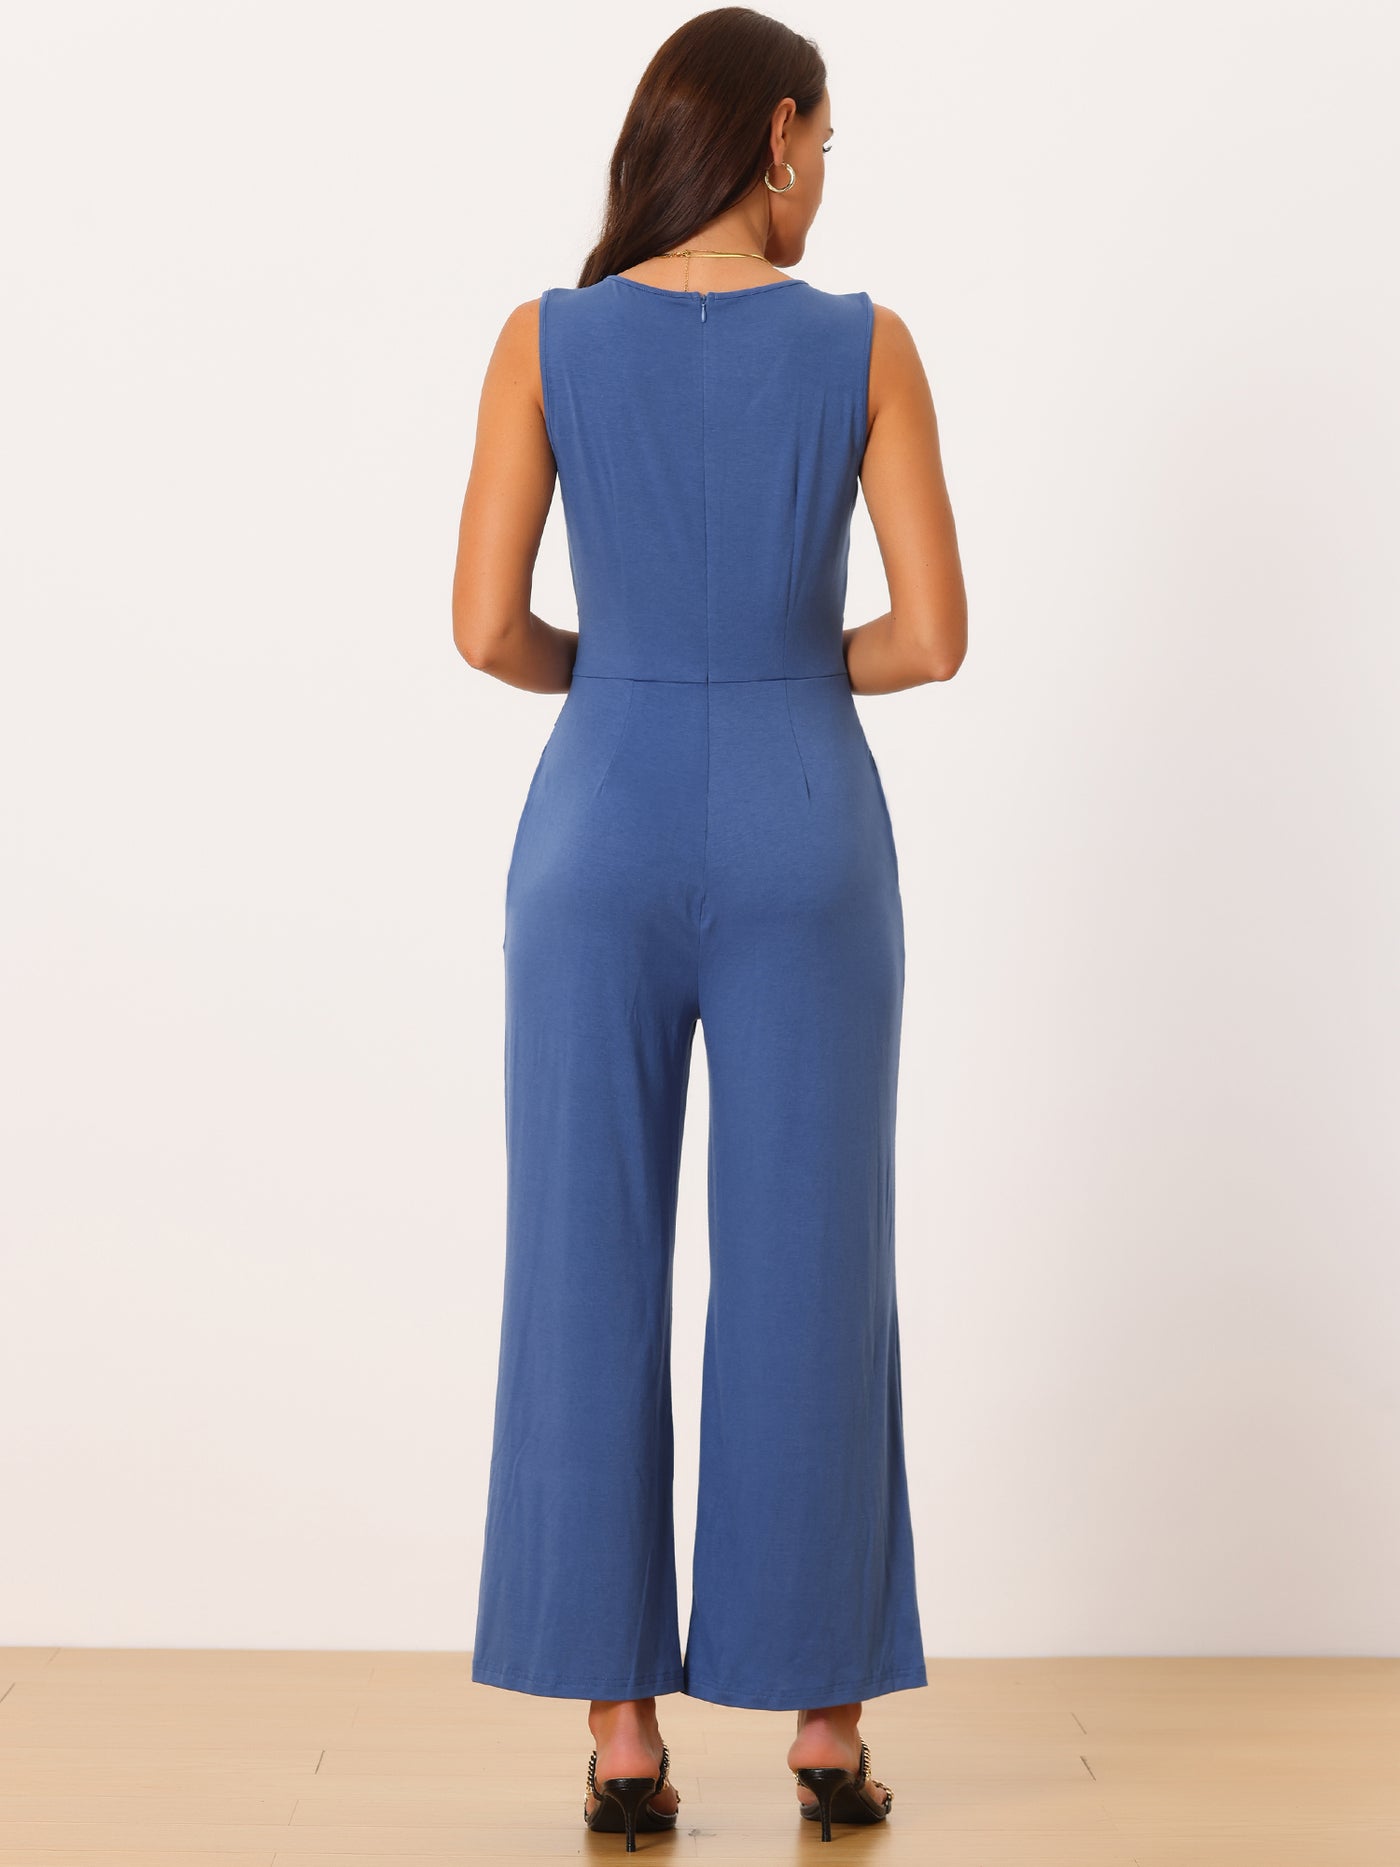 Bublédon Sleeveless Tie Waist Stretchy Wide Legs Jumpsuits with Pockets